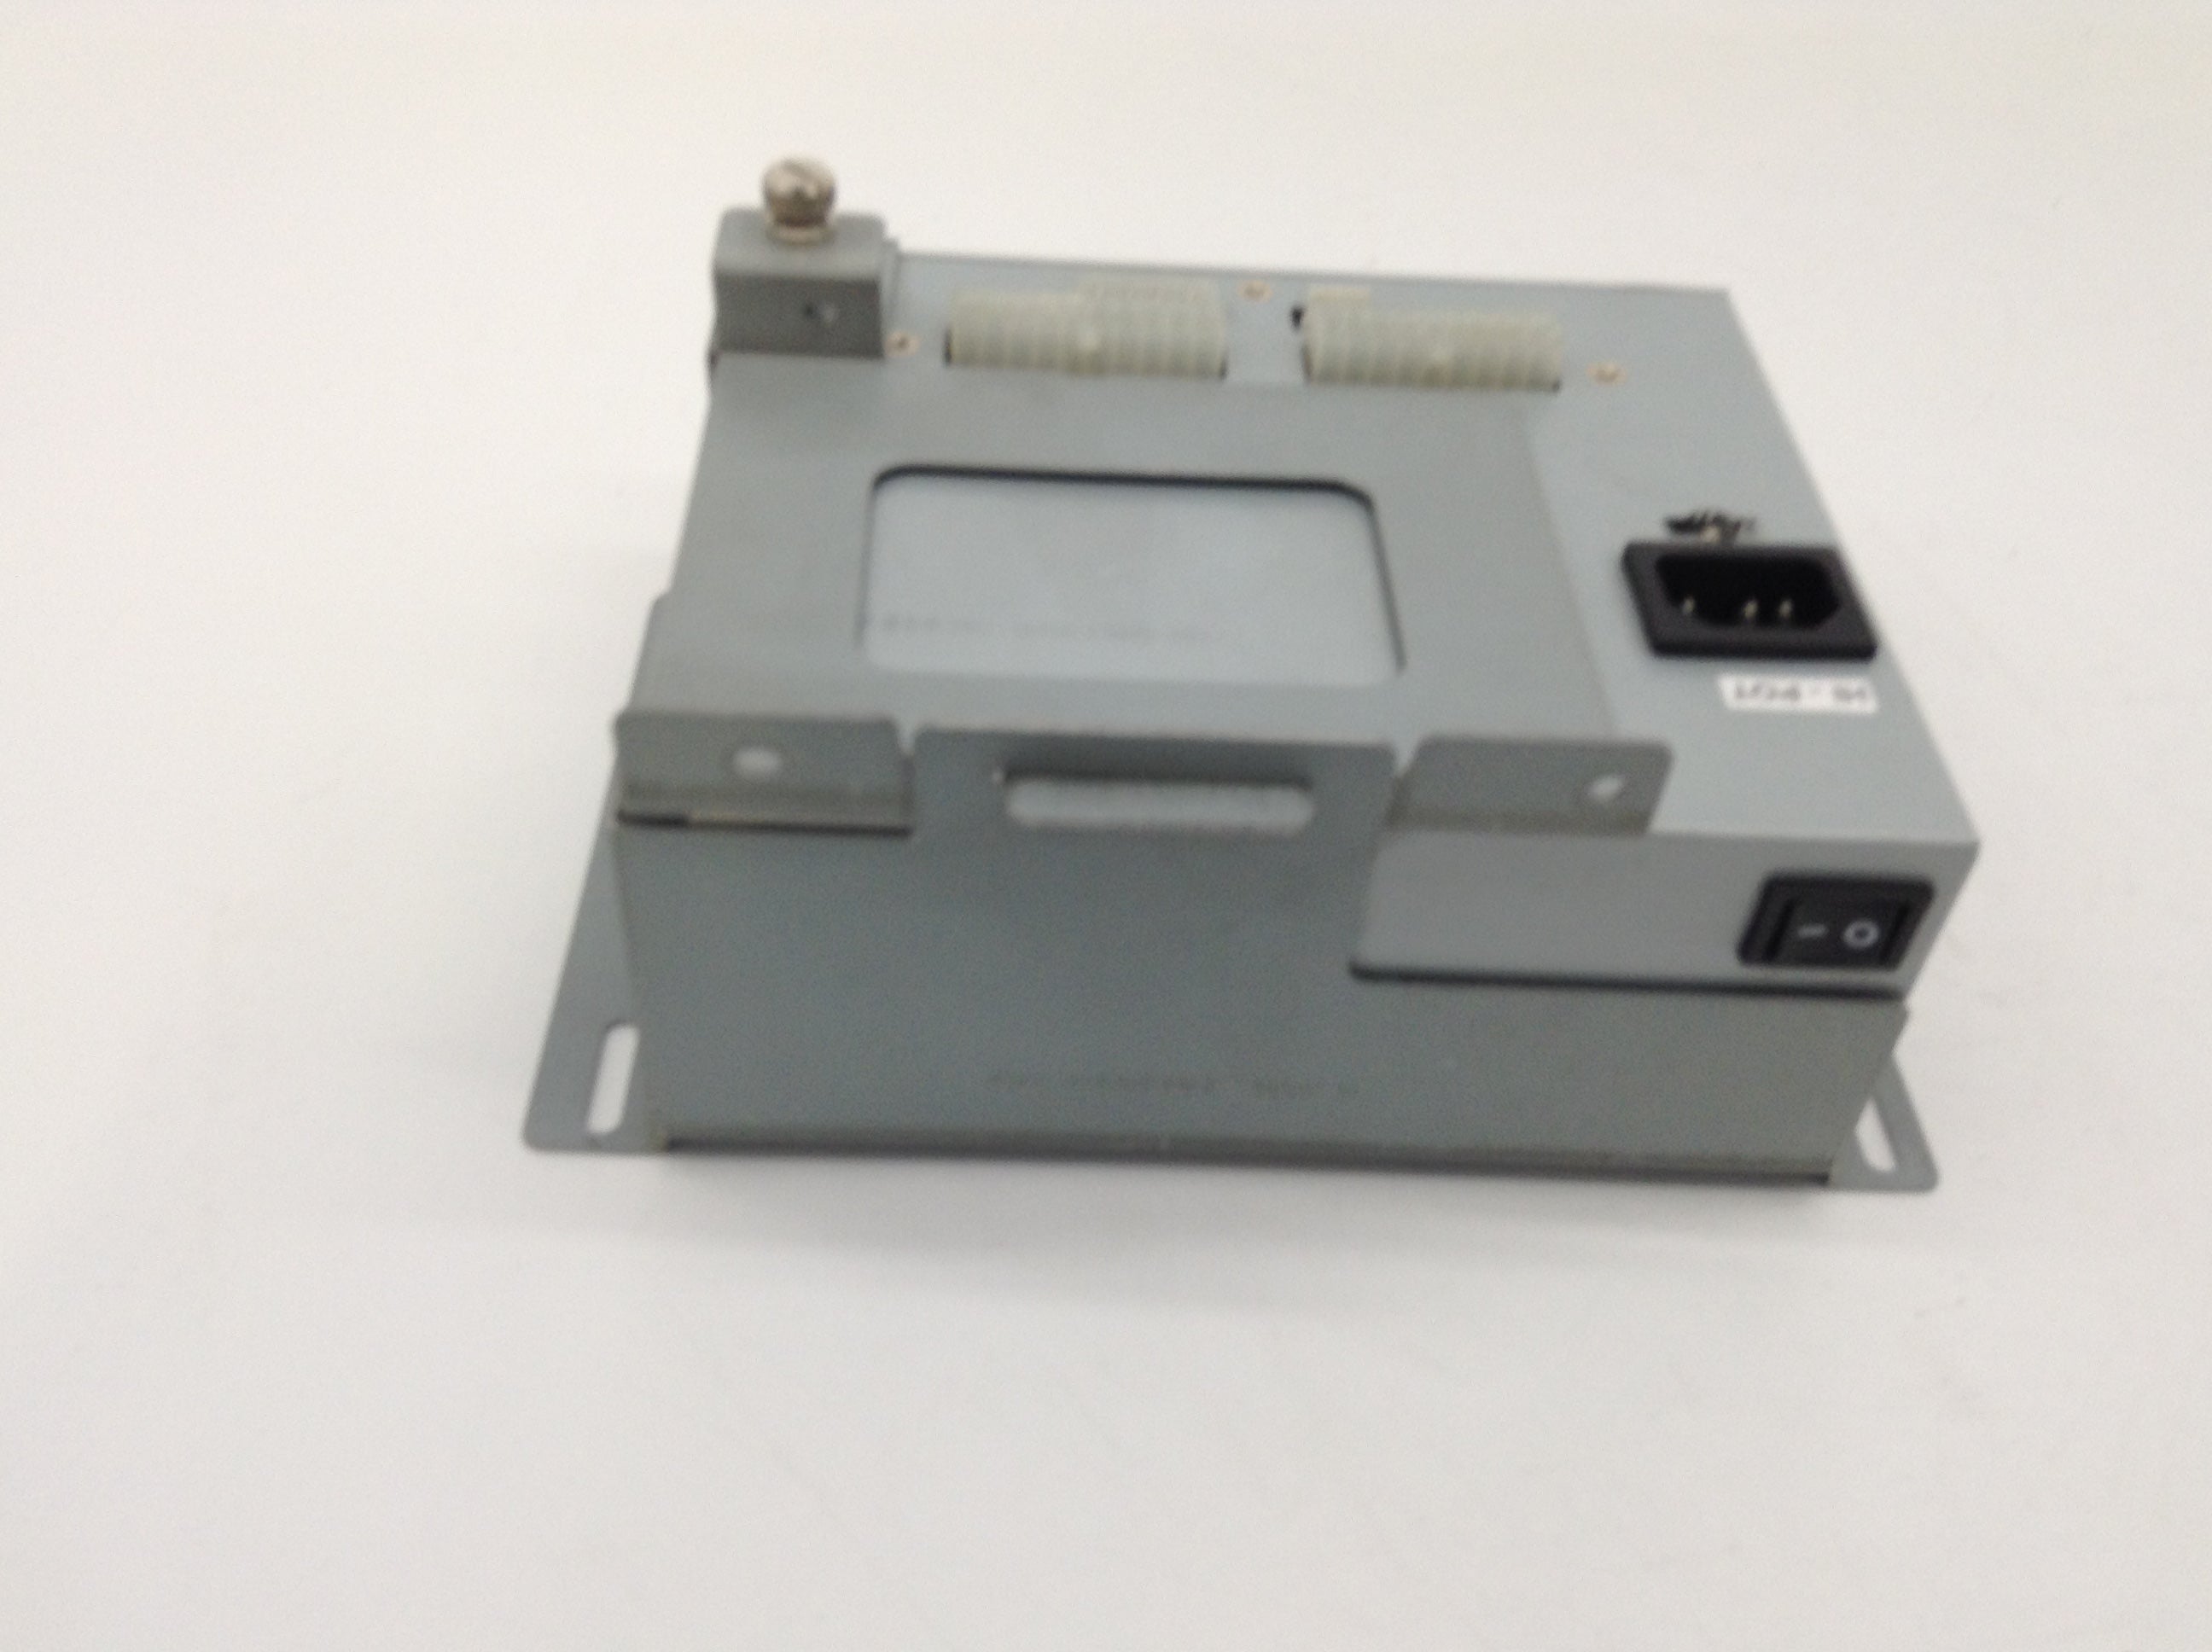 Load image into Gallery viewer, A Biomedical Service NCR 497-0442824B Power Supply 280.00